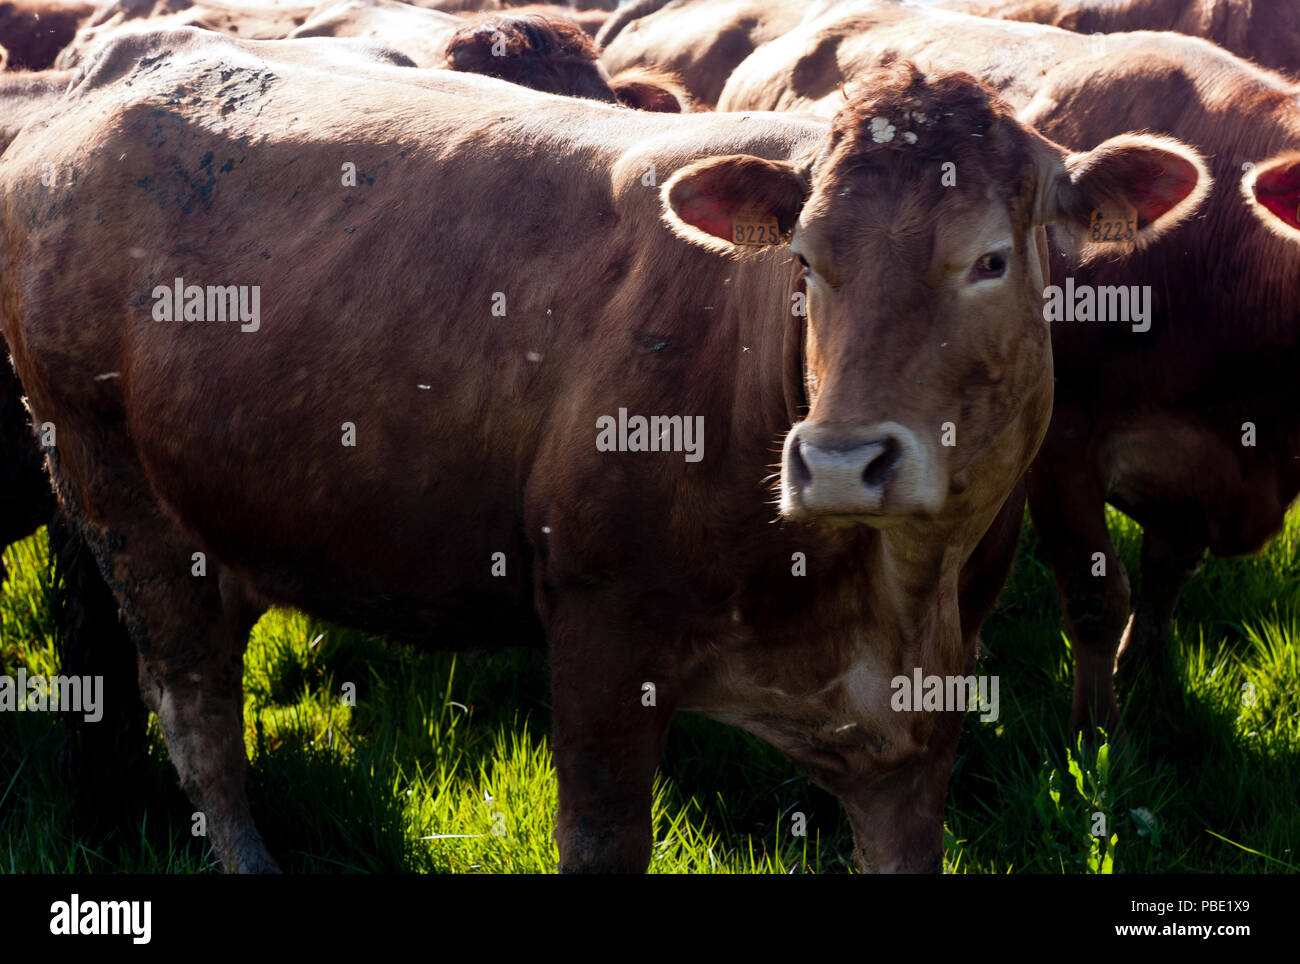 A small herd of cattle near the hamlet of St Martial, In the community of Varen, Tarn et Garonne, Occitanie, France In springtime afternoon sunlight. Stock Photo